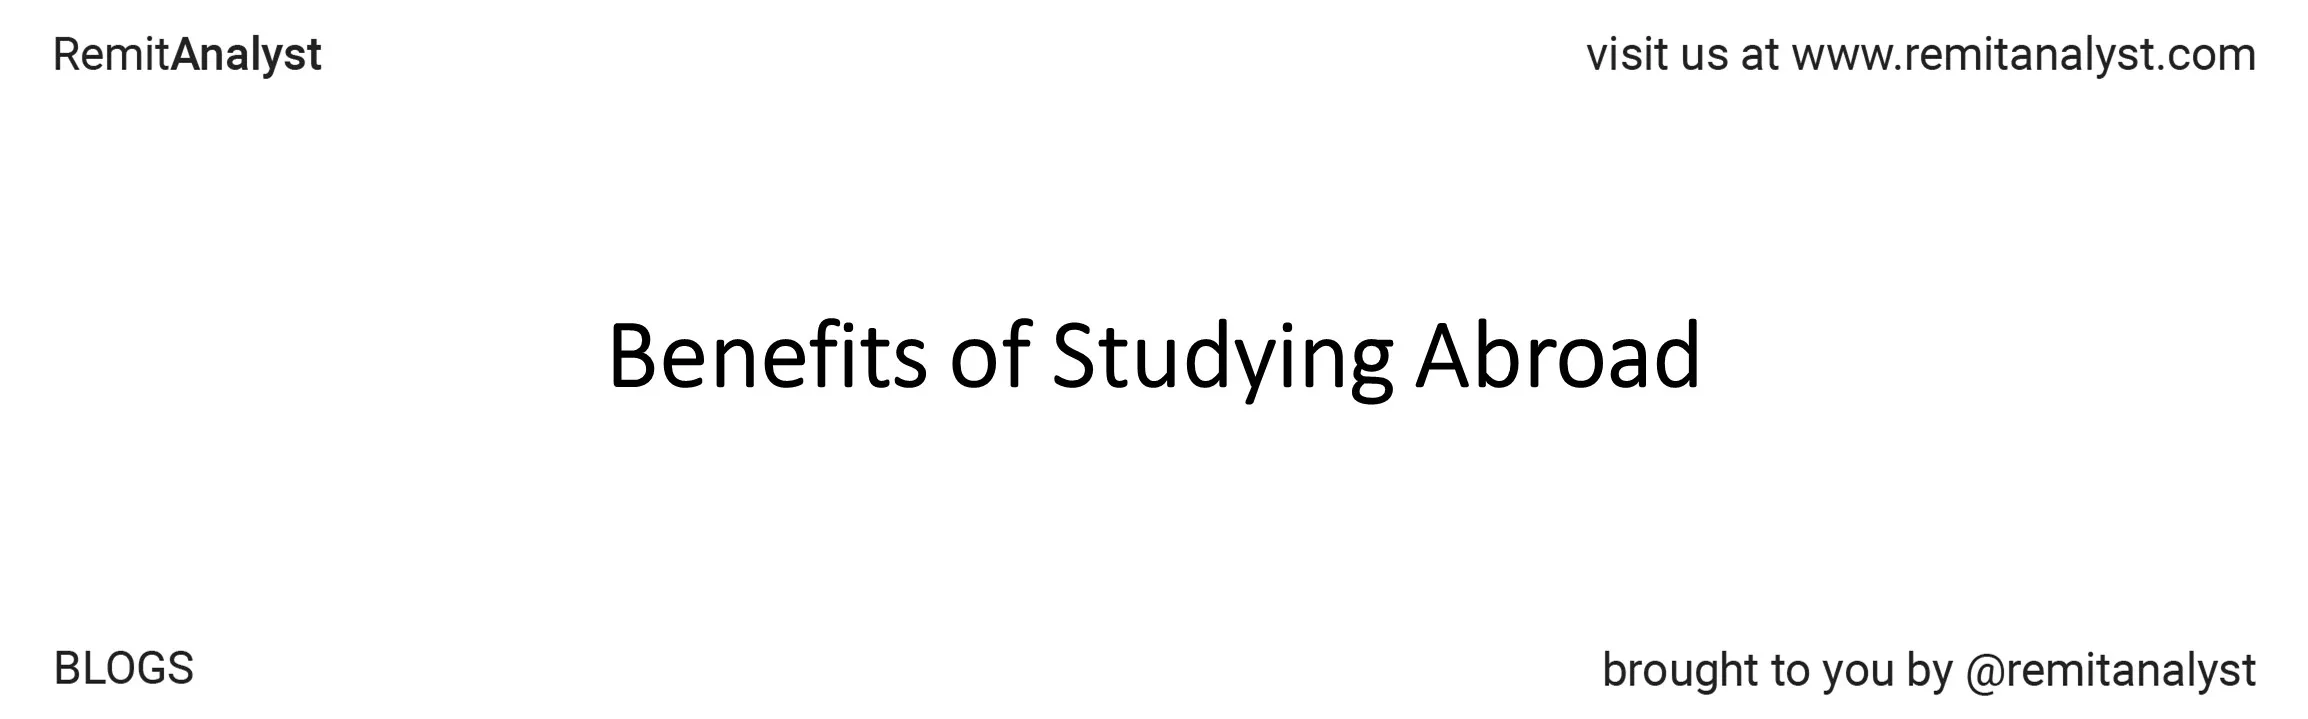 what-are-benefits-of-studying-abroad-title